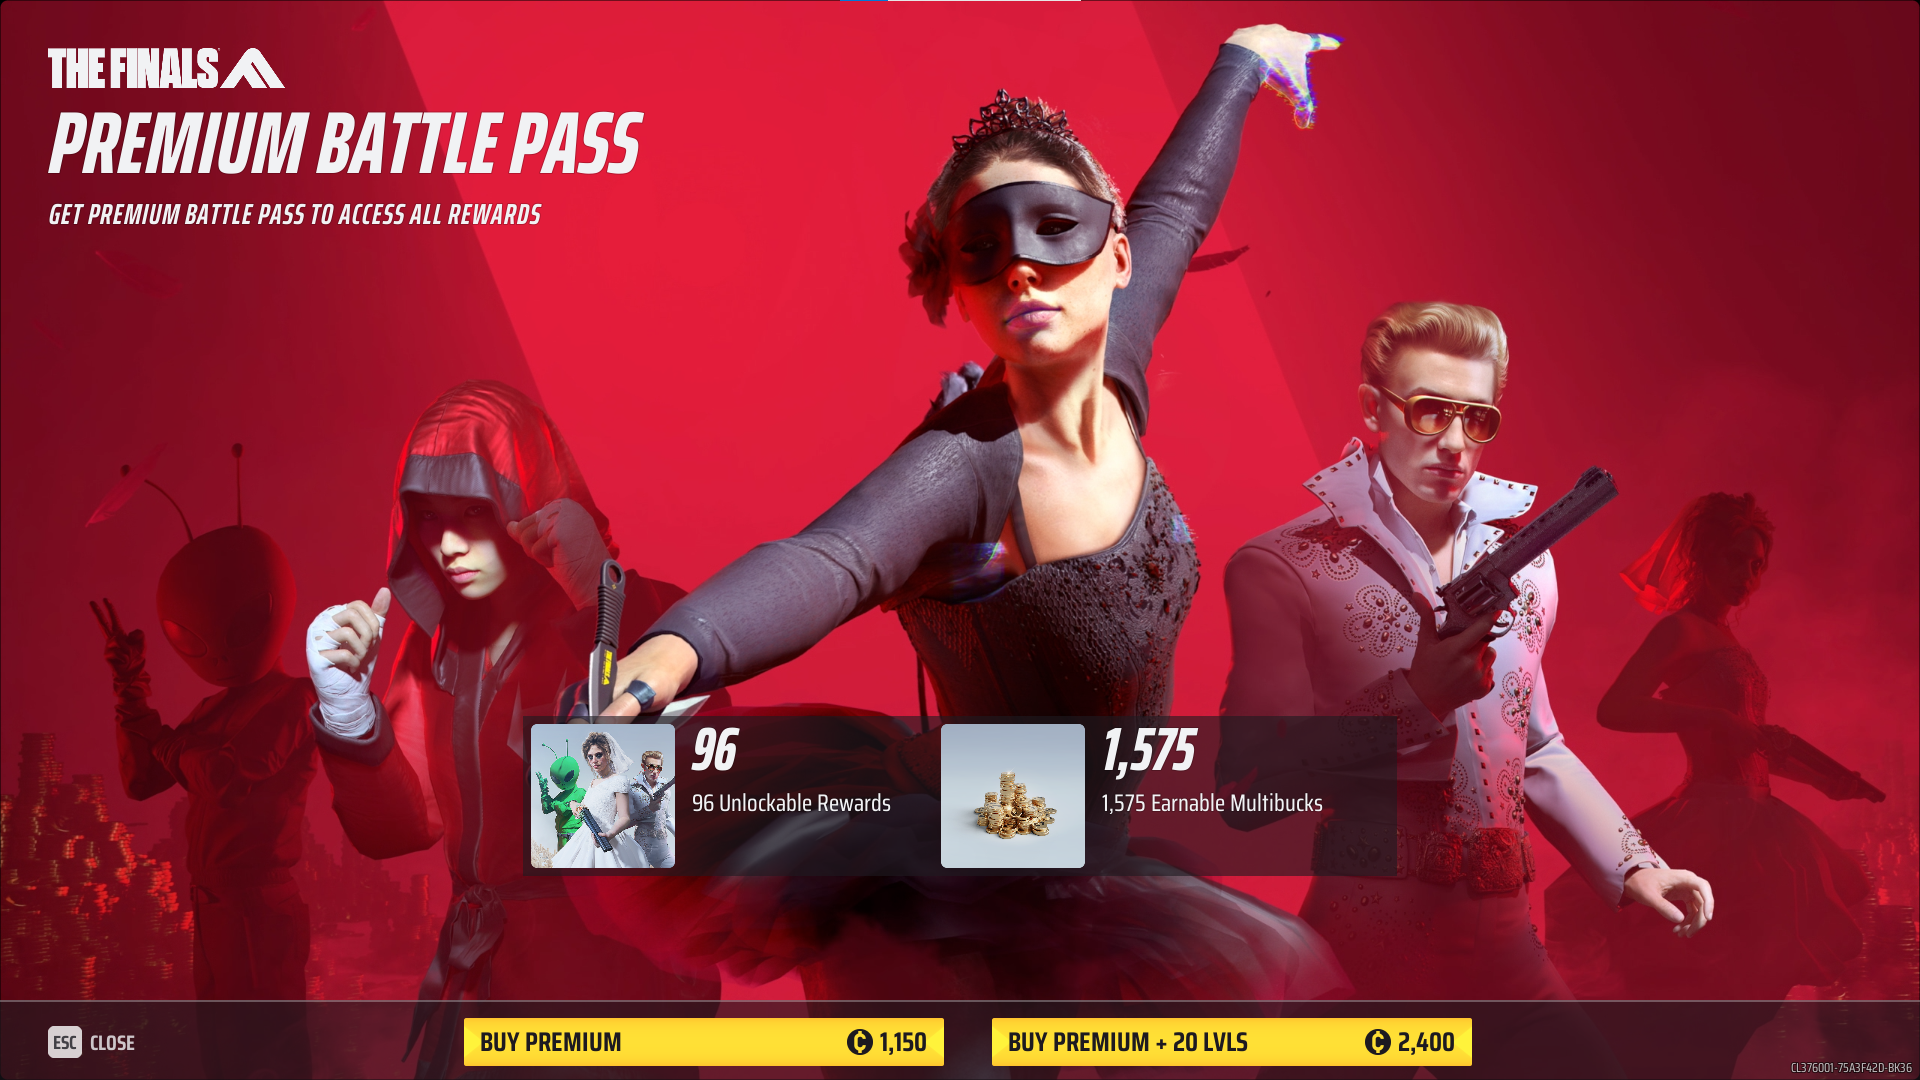 A screenshot showing the Multibucks cost of the Premium Battle Pass in The Finals. 